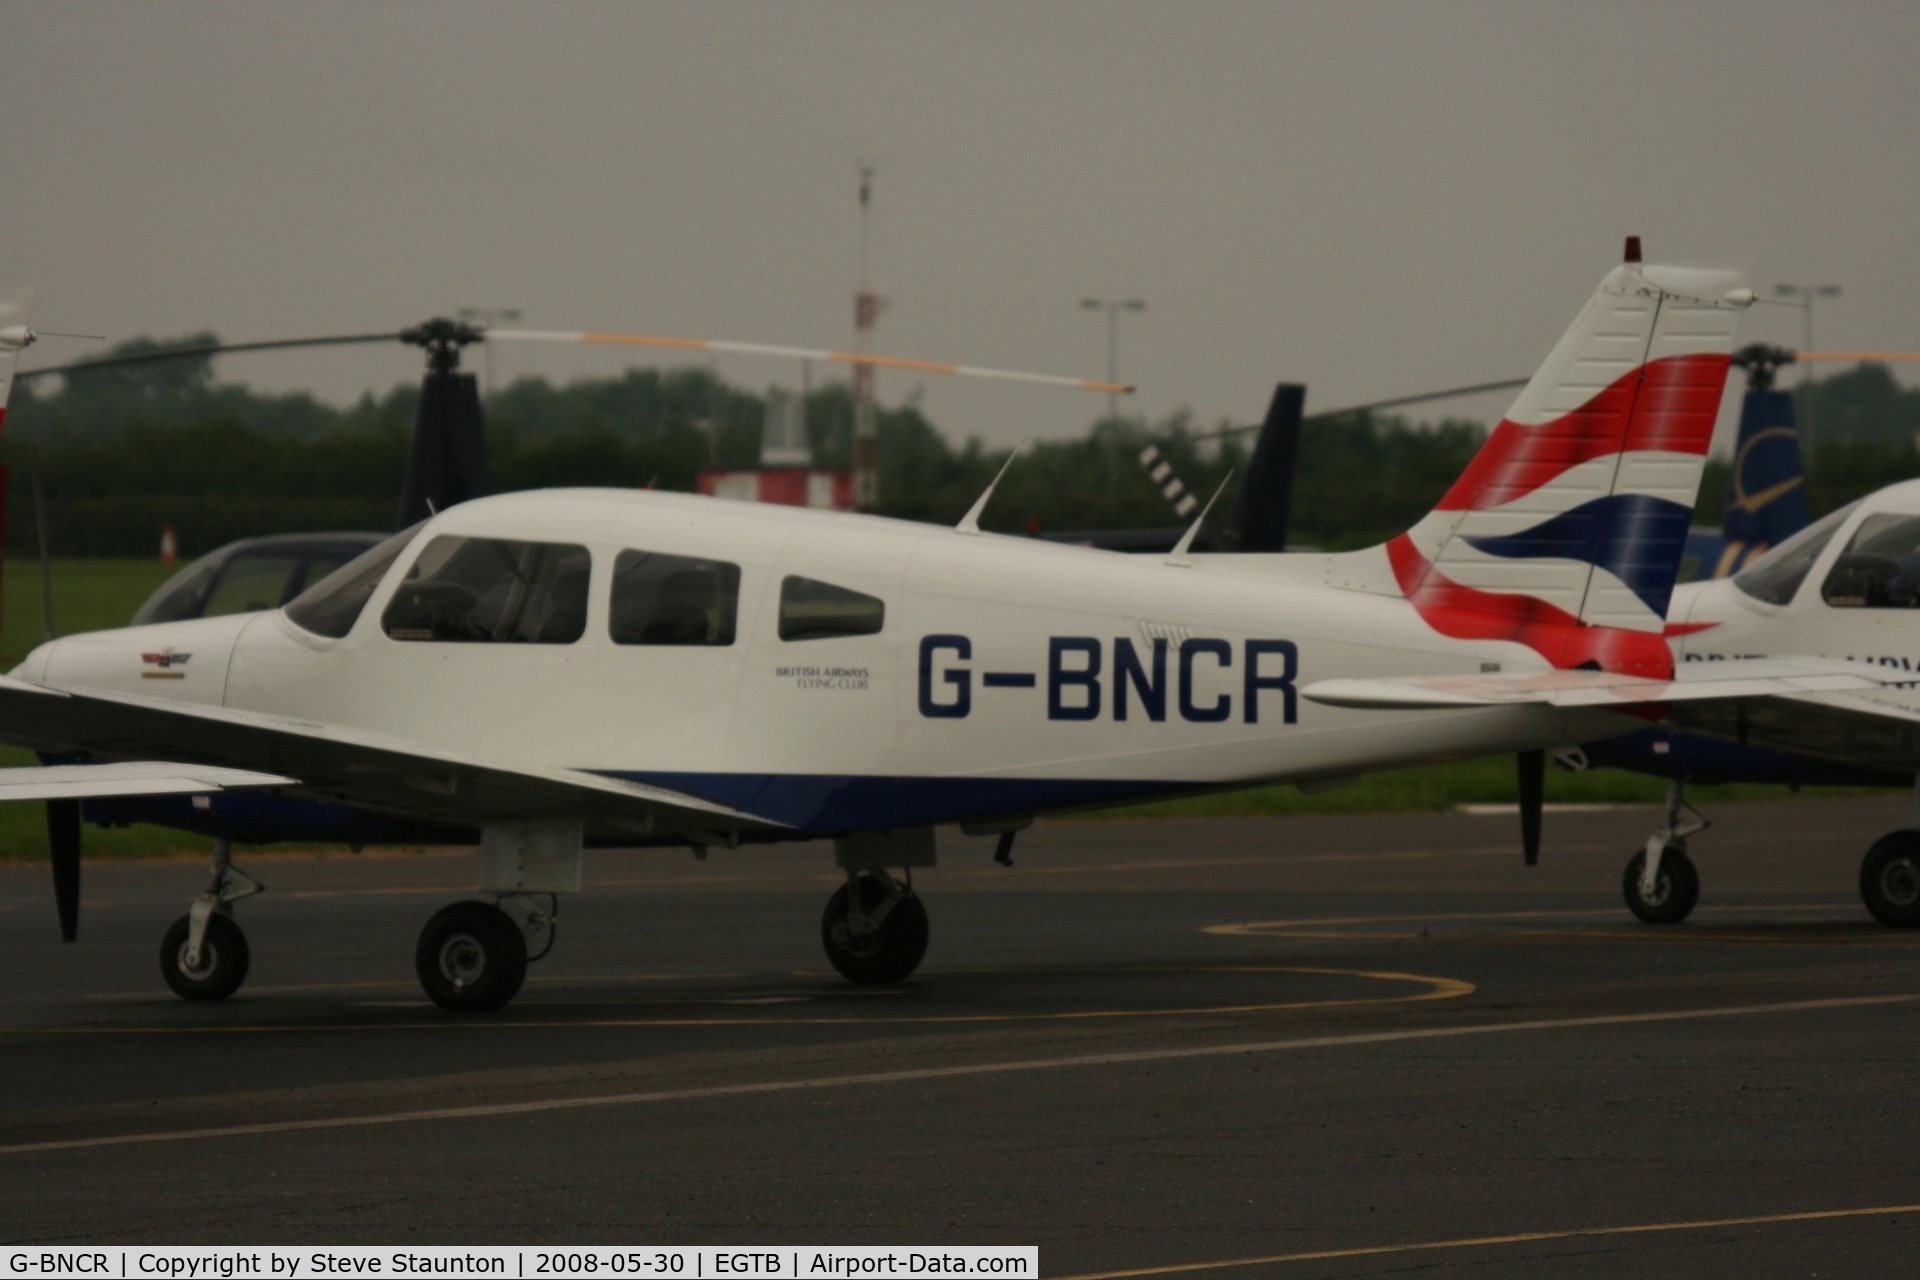 G-BNCR, 1980 Piper PA-28-161 Cherokee Warrior II C/N 28-8016111, Taken at Wycombe Air Park using my new Sigma 50 to 500 APO DG HSM lens (The Beast)